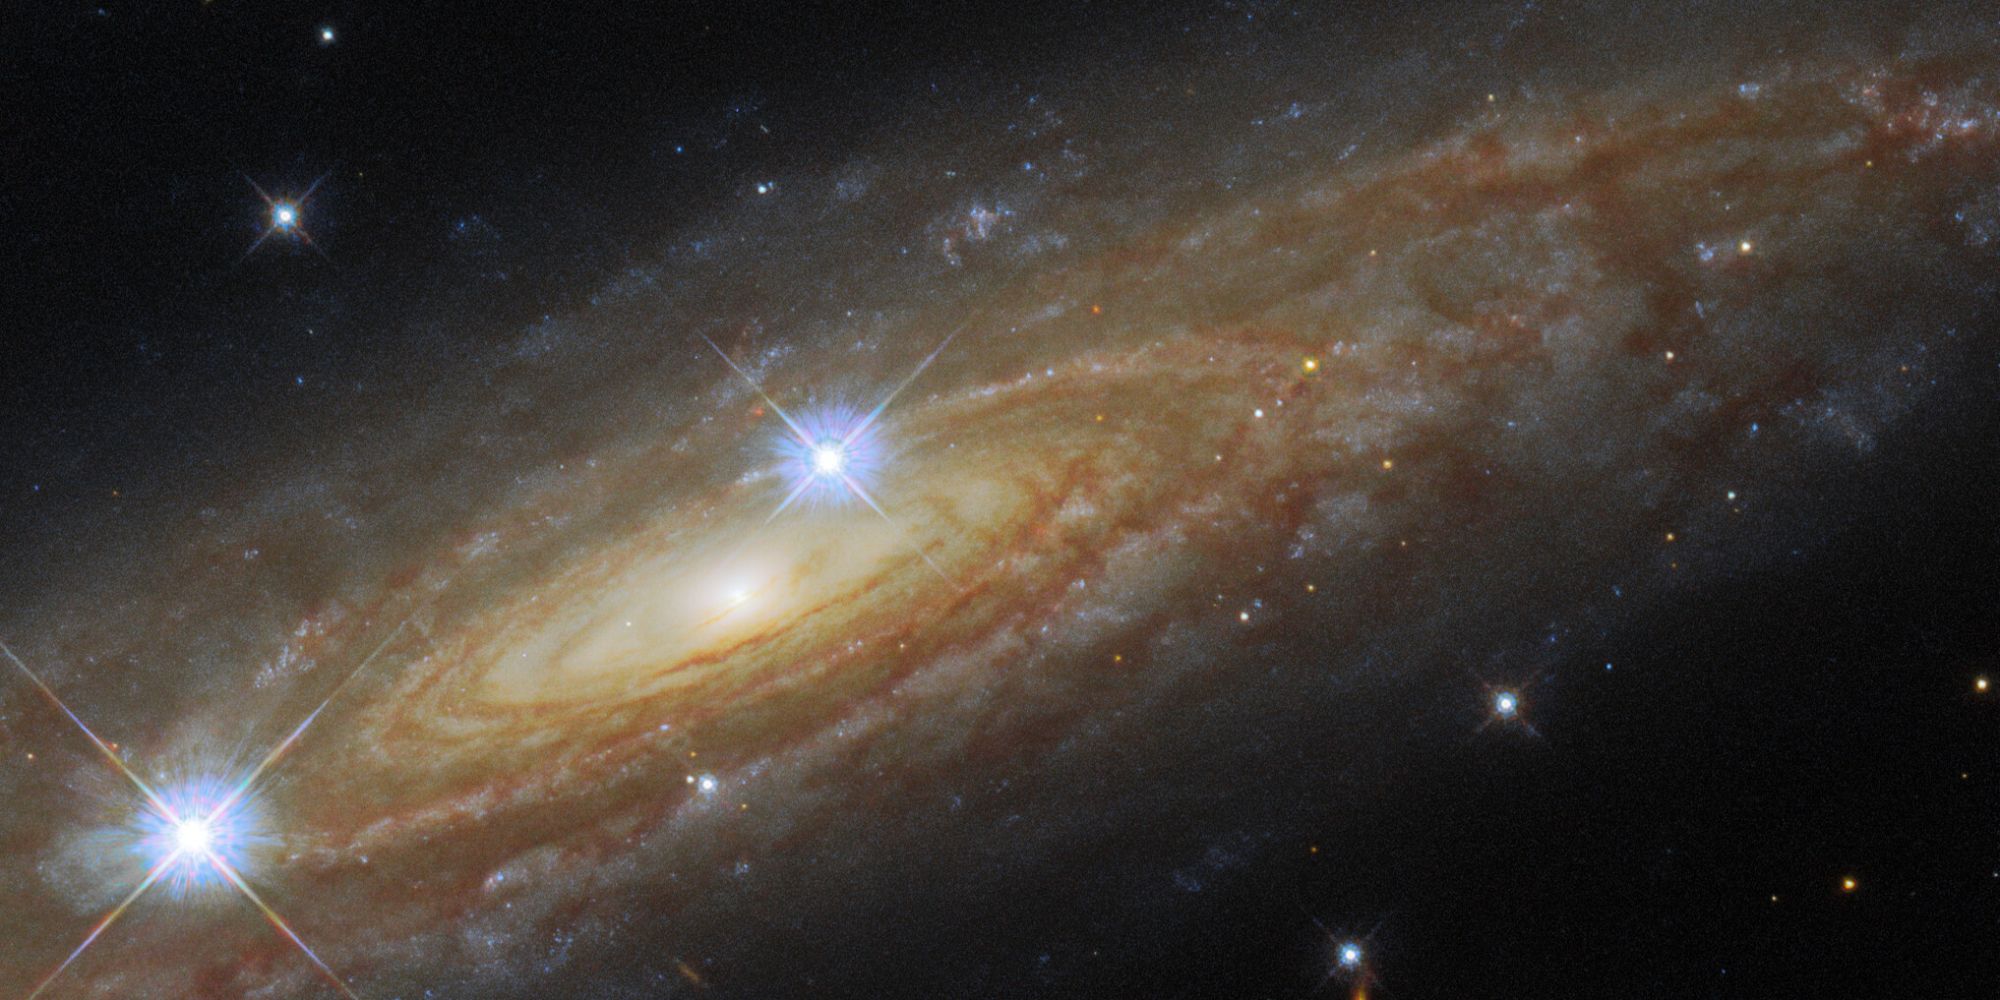 Photo of spiral galaxy UGC 11537, captured by Hubble